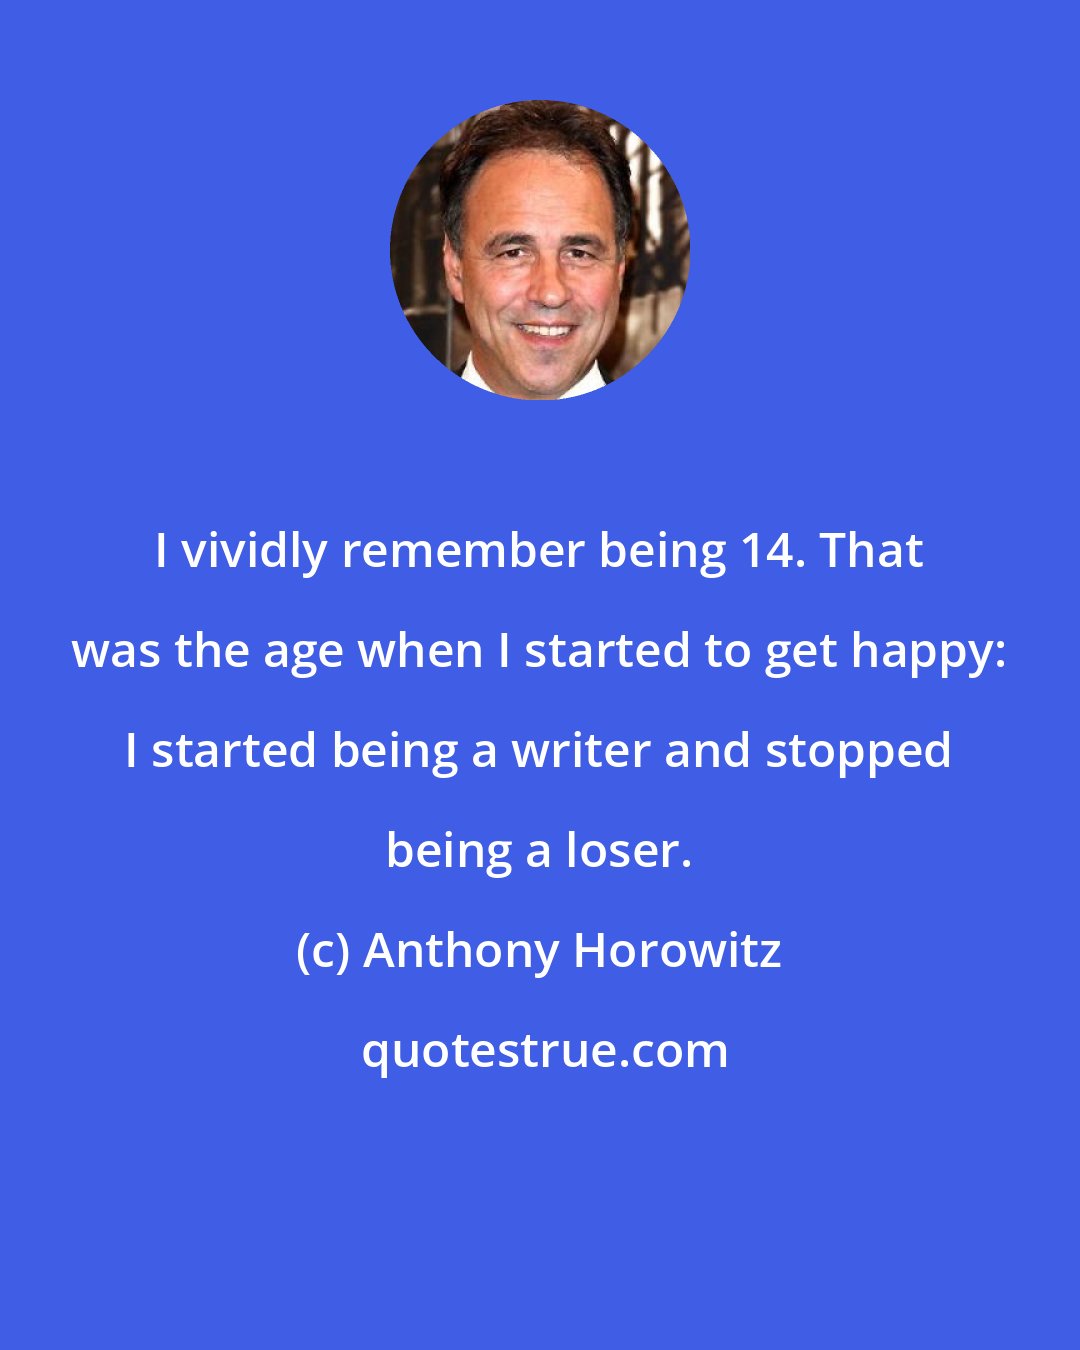 Anthony Horowitz: I vividly remember being 14. That was the age when I started to get happy: I started being a writer and stopped being a loser.